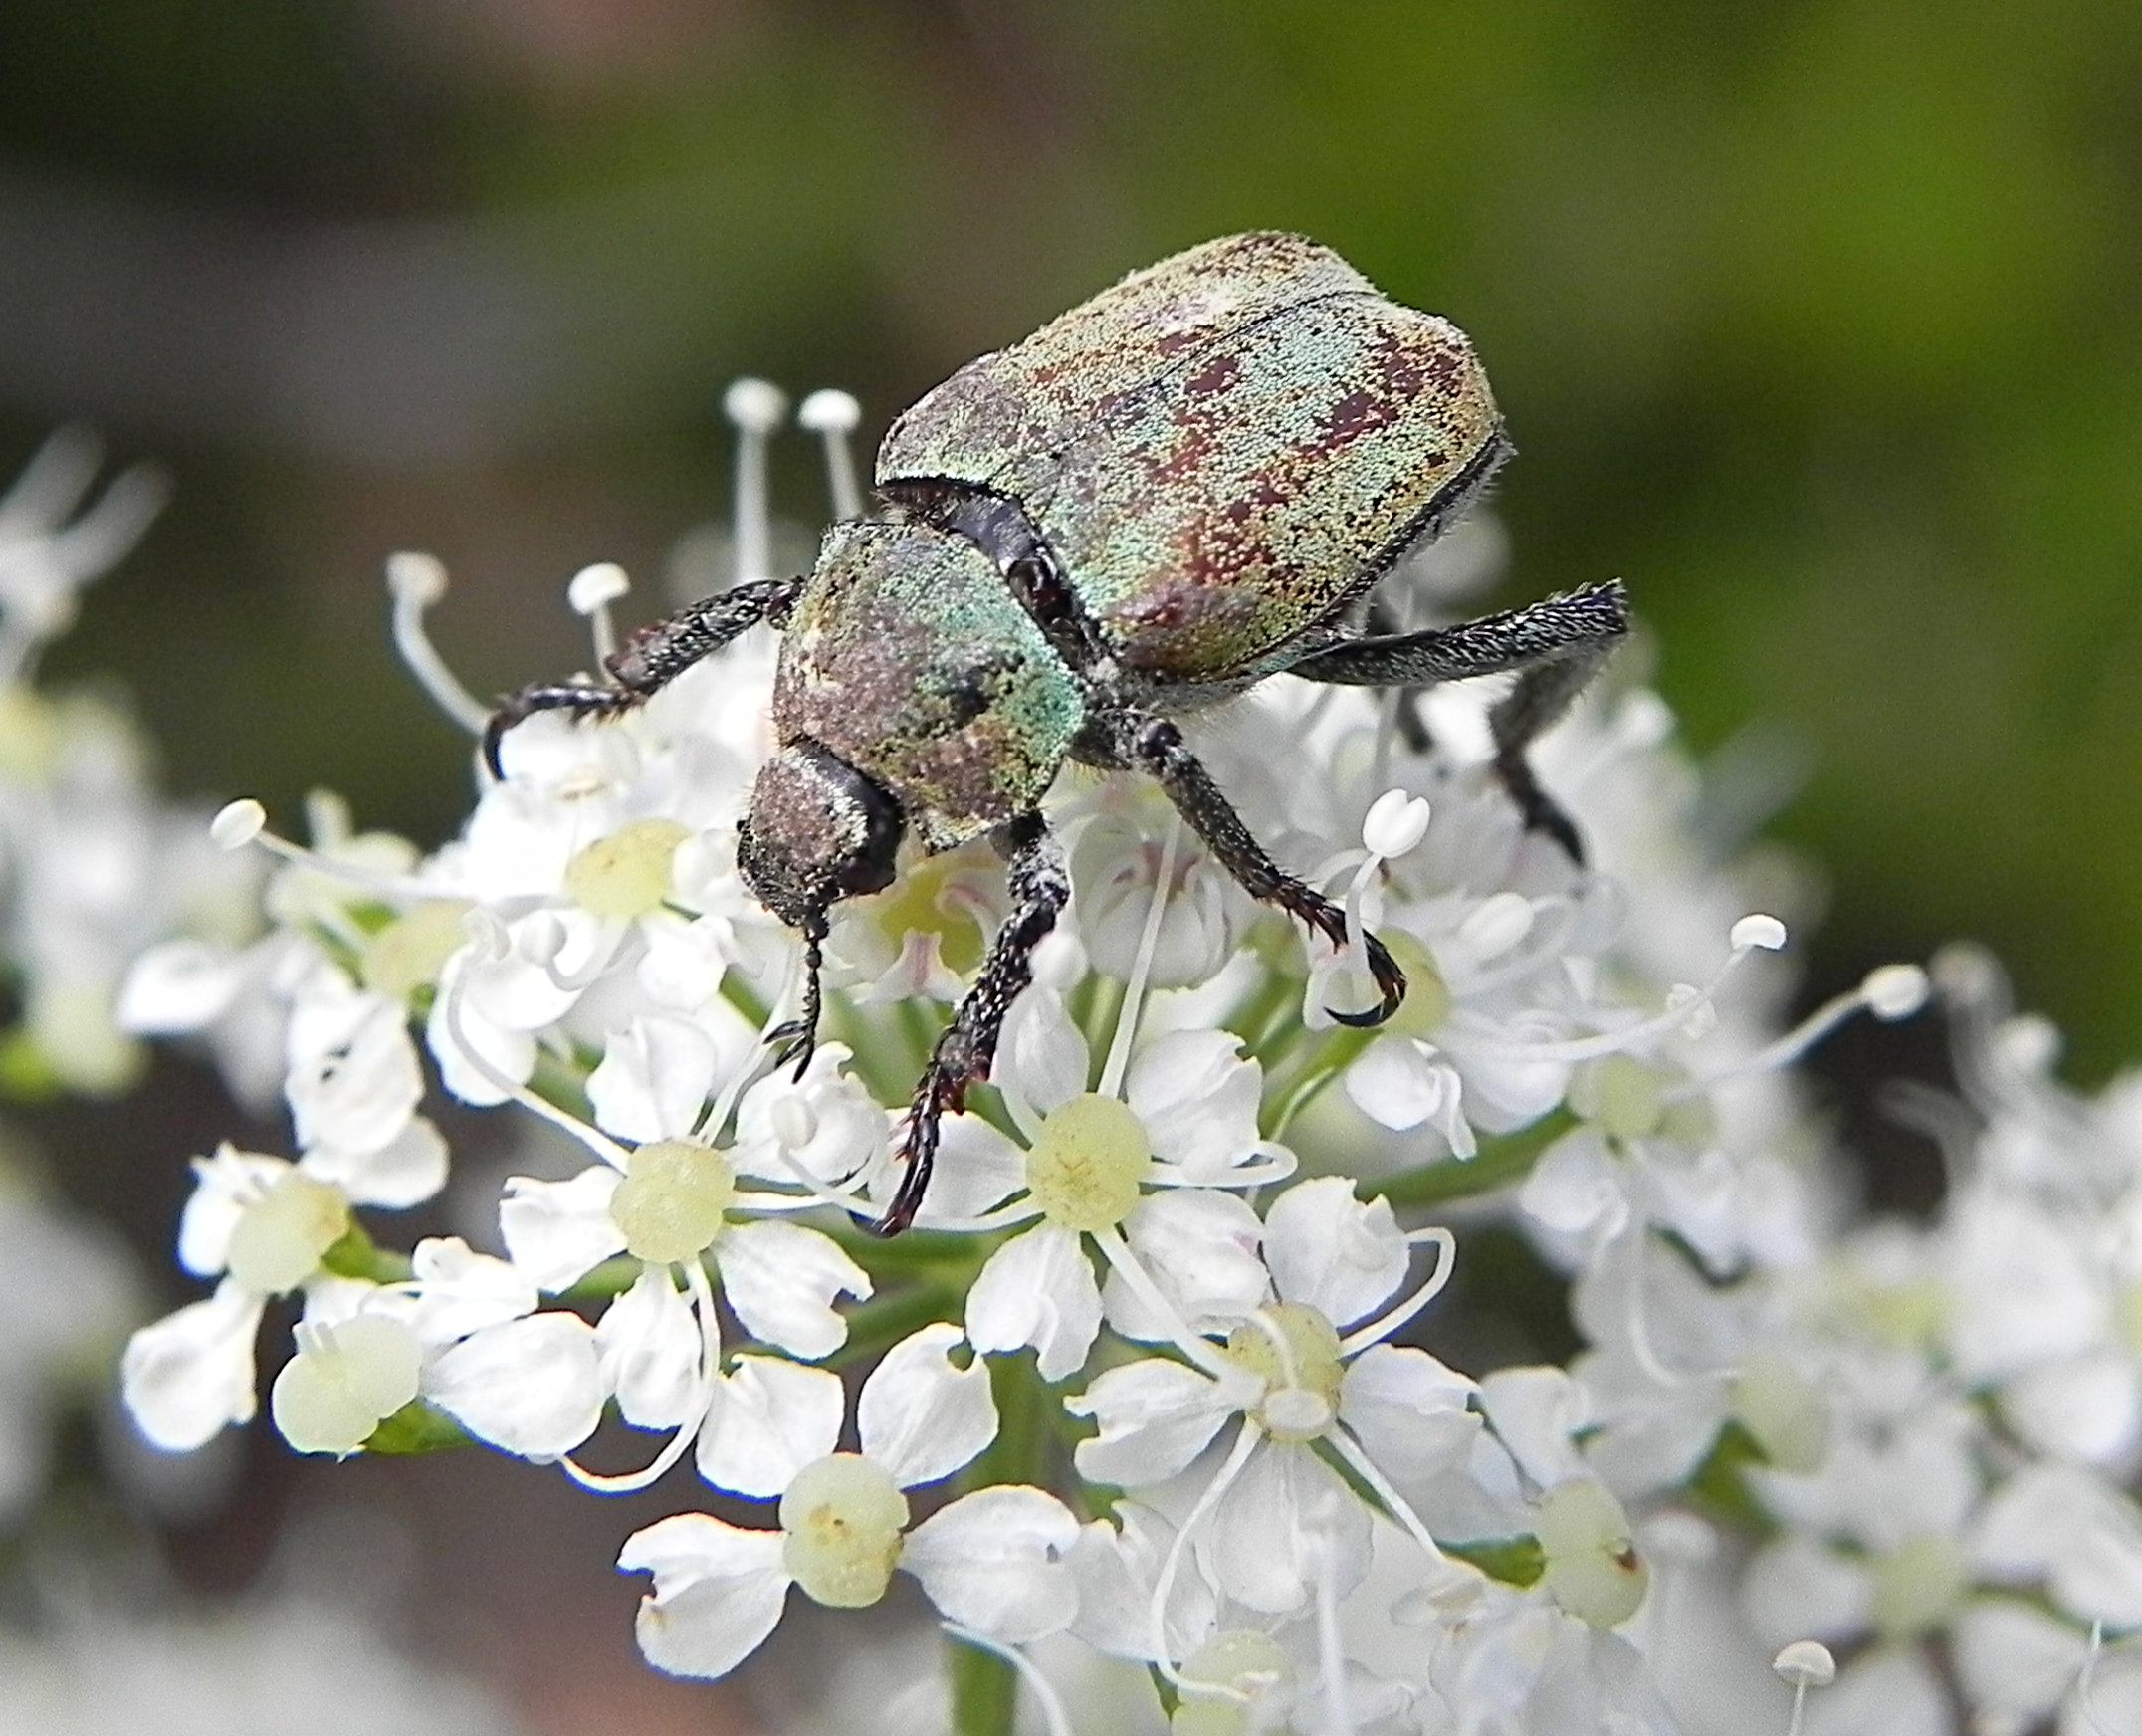 Fam. Scarabaeidae. Italia, Pre Alps (Garda Lake), 5 Jul 2014. Provided by Paolo to children for didactics, but not shot with them